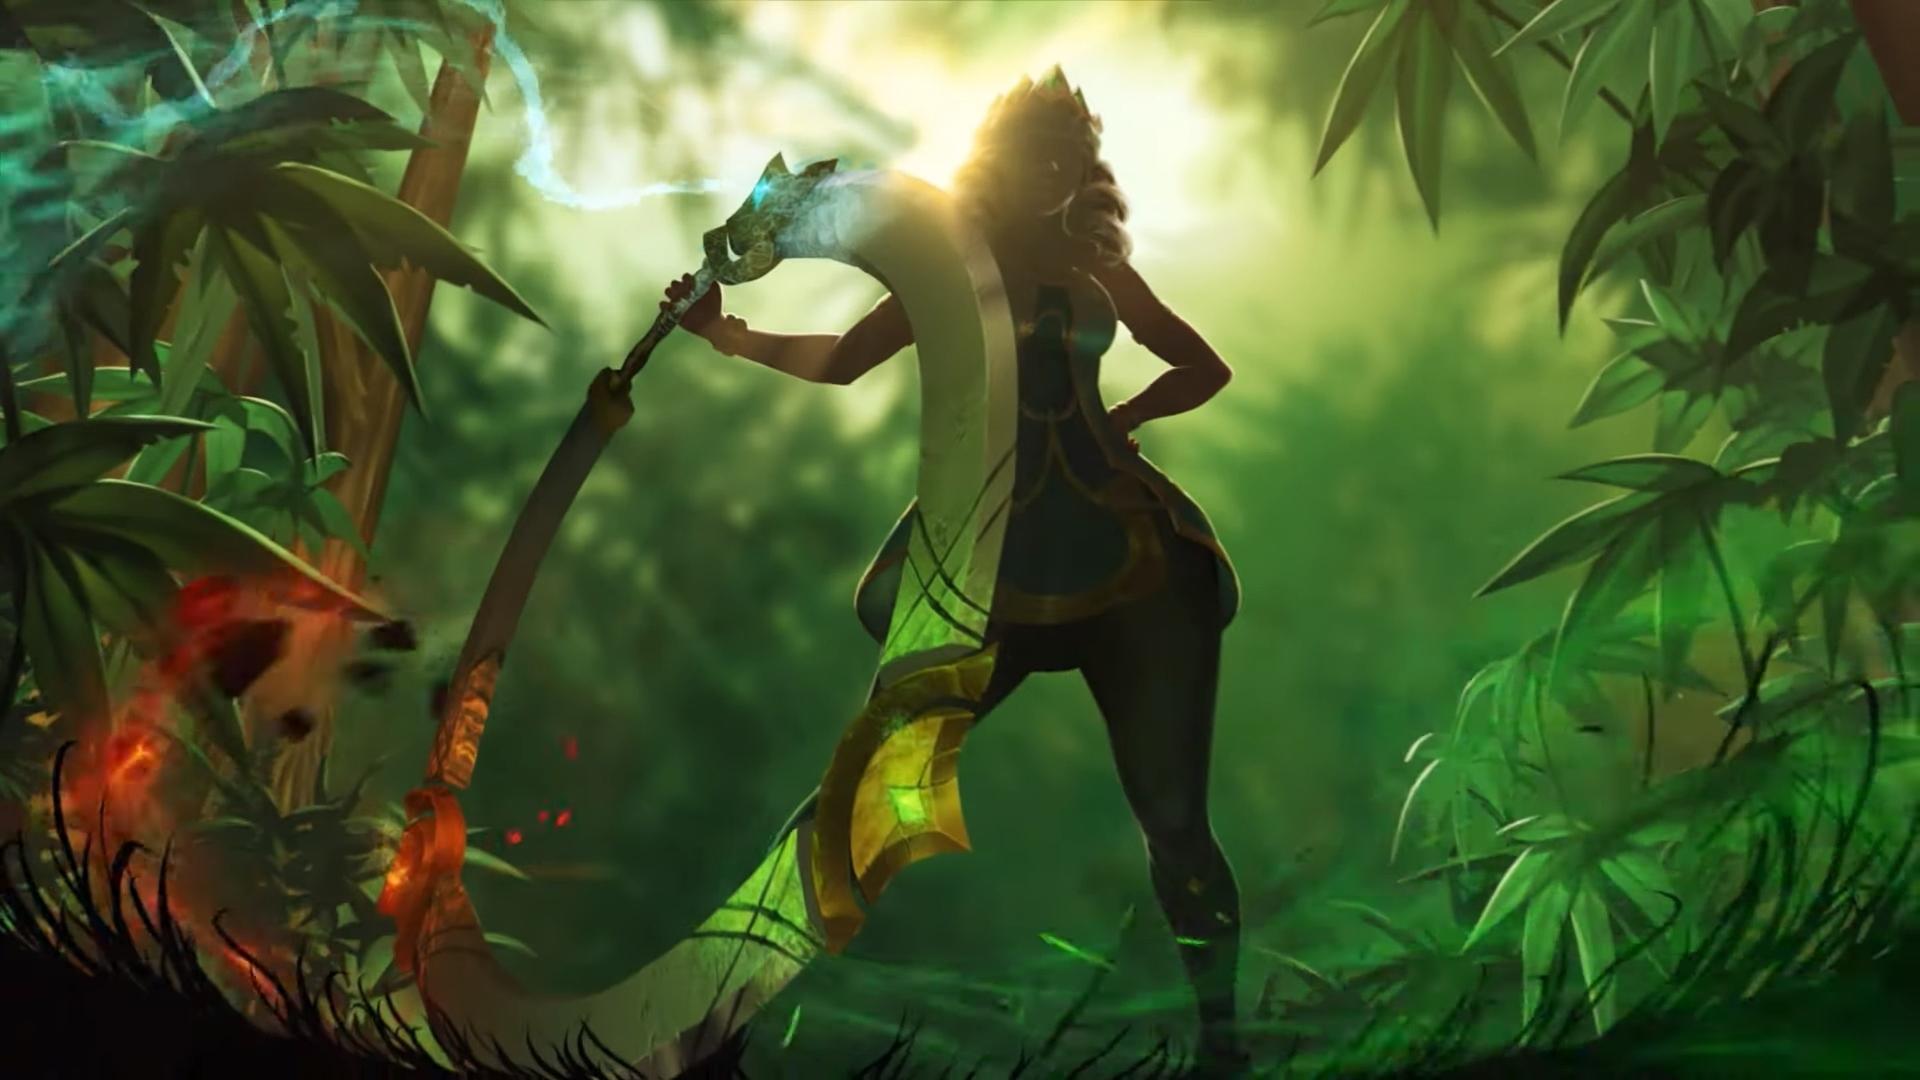 League of Legends' New Champion Qiyana Is an AD Assassin From the Jungle